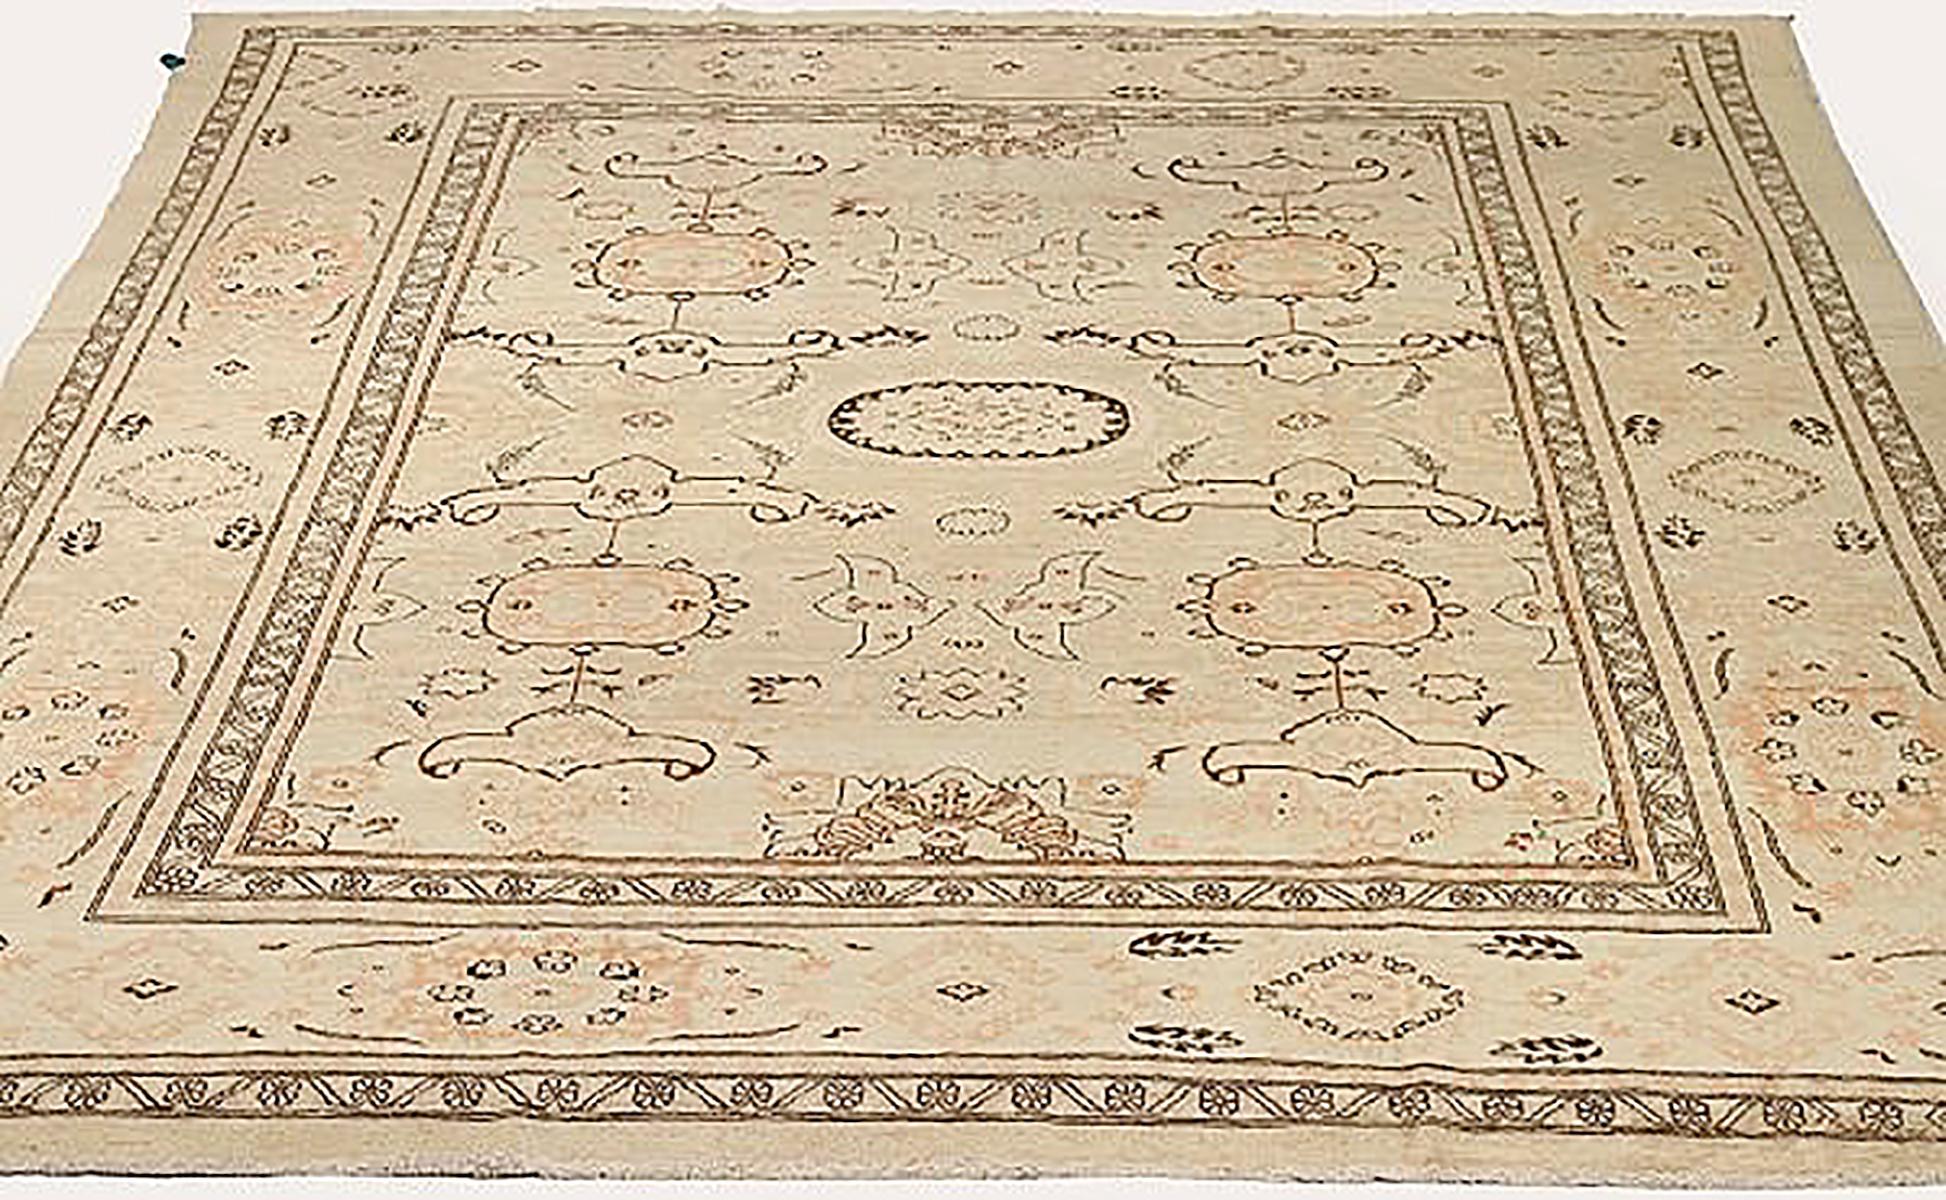 Antique Persian rug handwoven from the finest sheep’s wool and colored with all-natural vegetable dyes that are safe for humans and pets. It’s a traditional Tabriz weaving featuring a lovely ensemble of floral designs in beige and black. It’s a